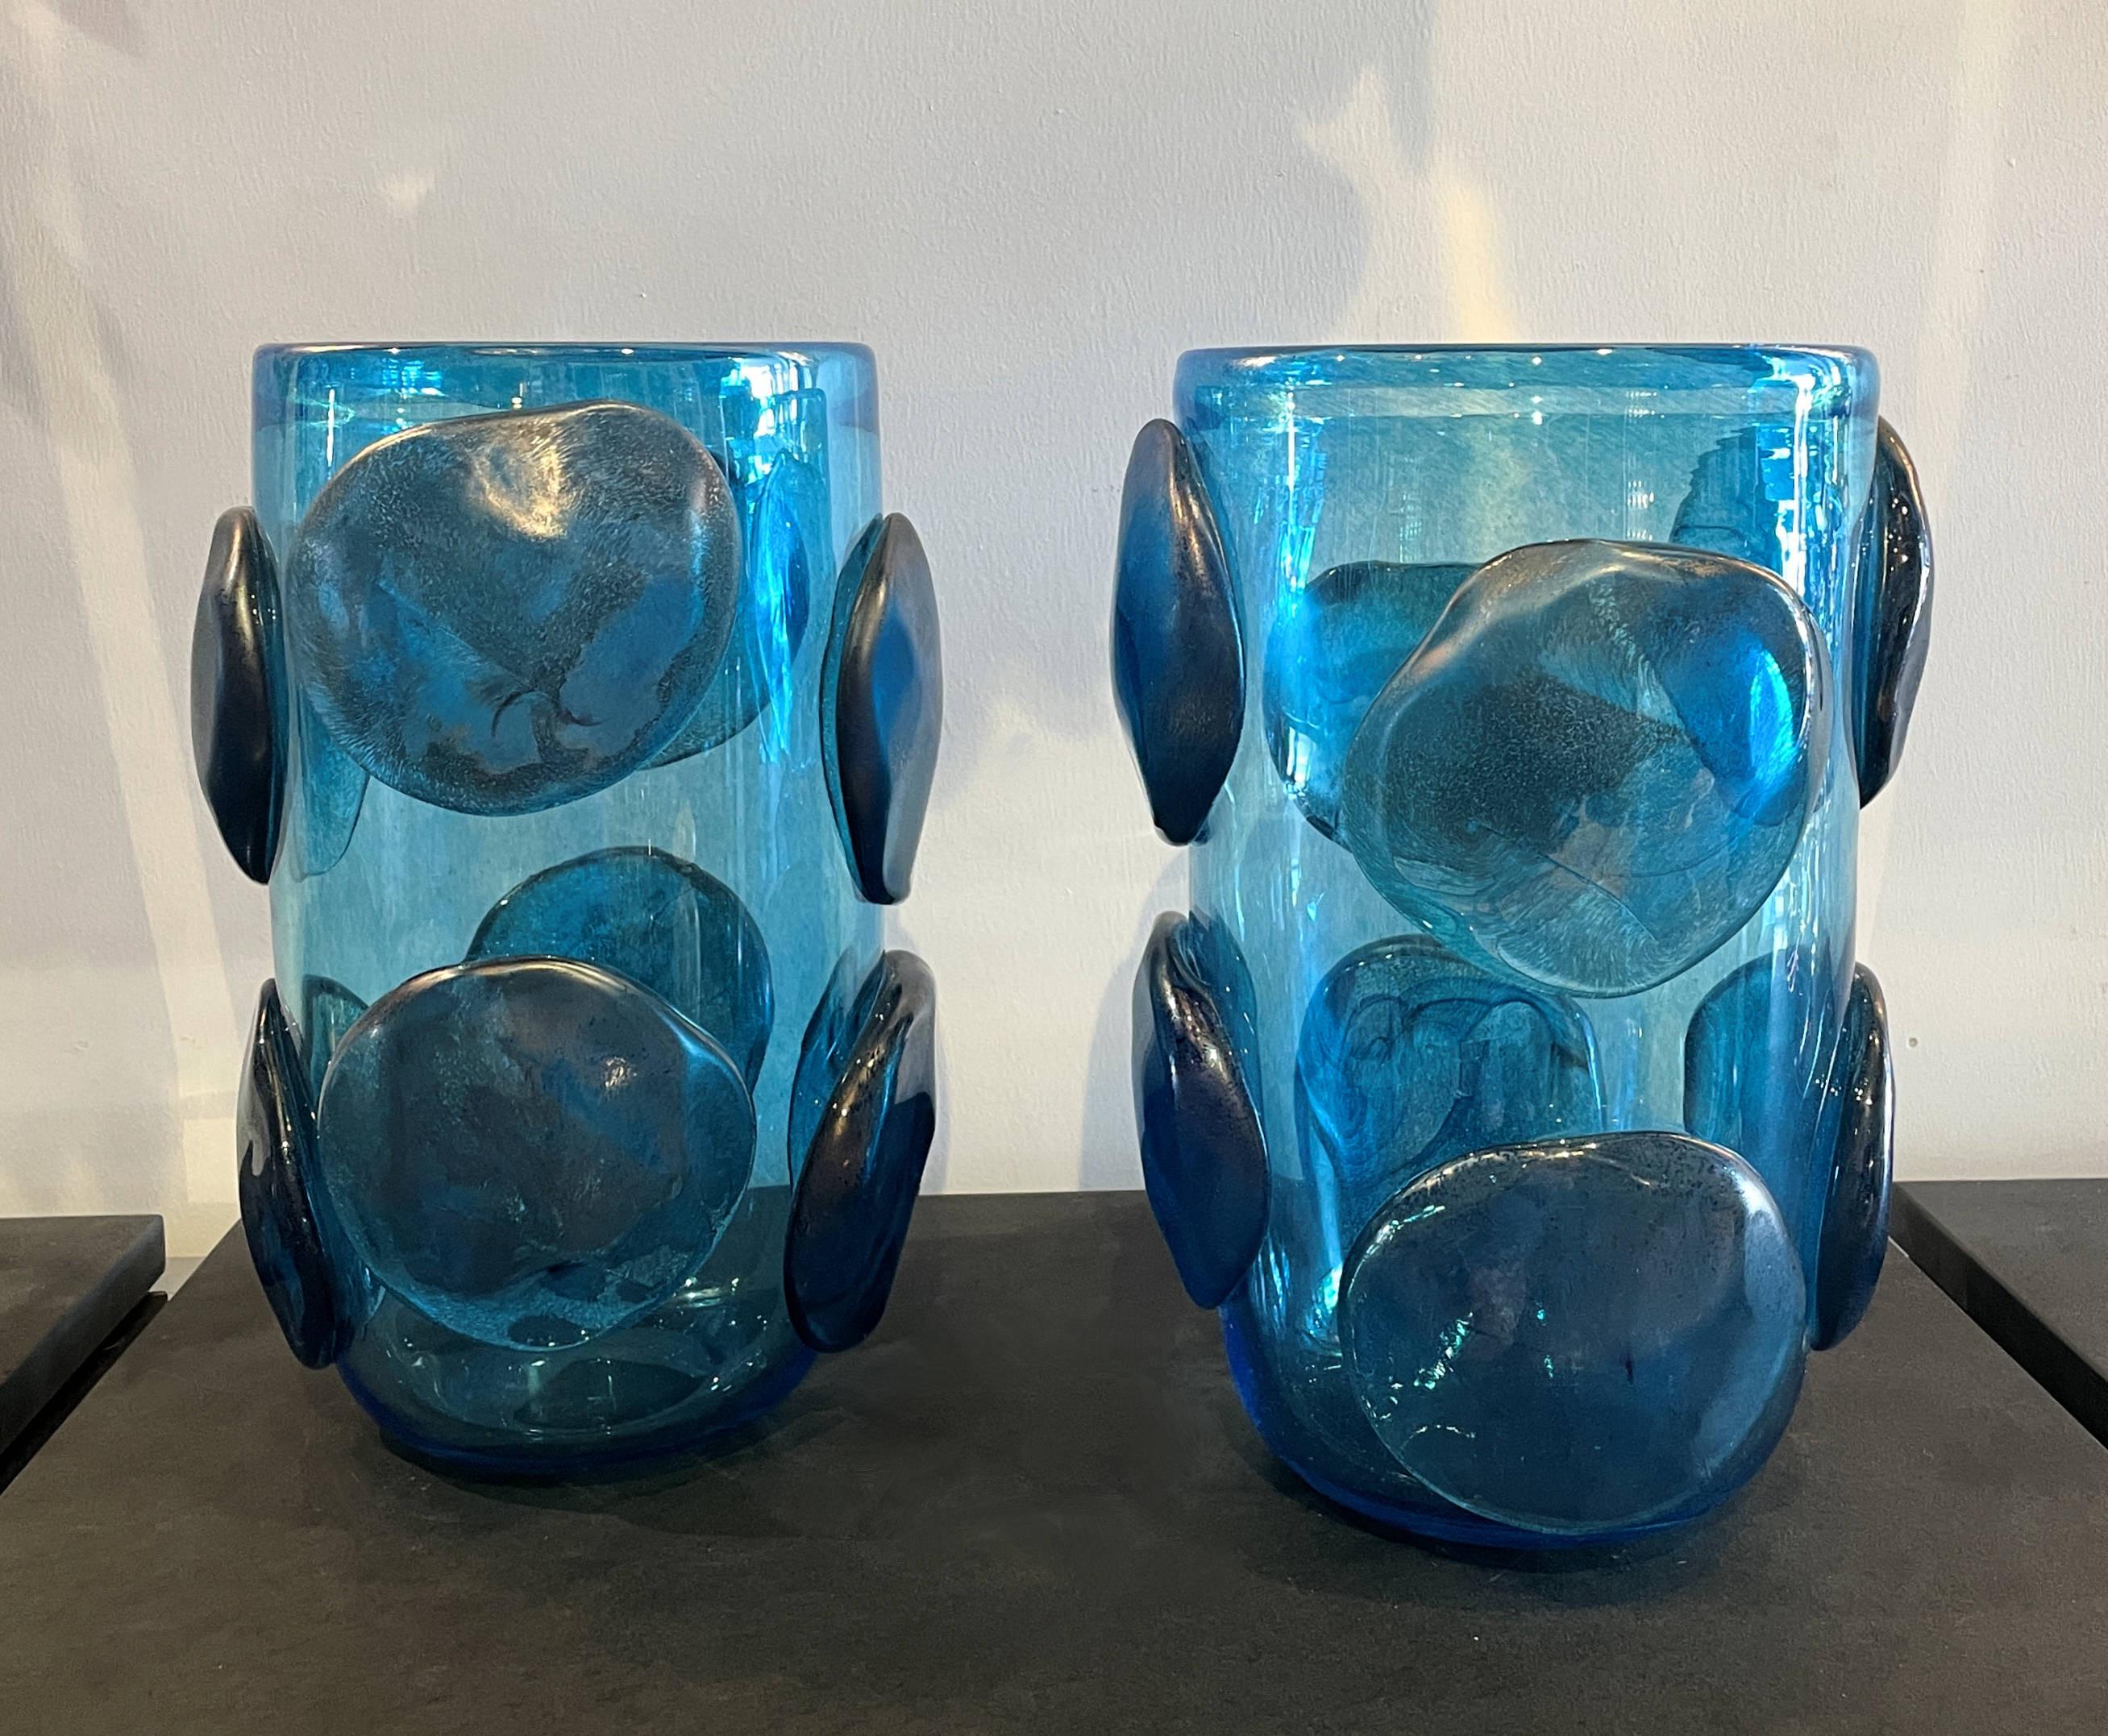 Pair of murano hand blown vases made of opaline glass by the Italian artist glassblower Costantini. The body is decorated with round freeform reliefs. These exquisite Venetian vases are signed underneath, Italy, 1980s.